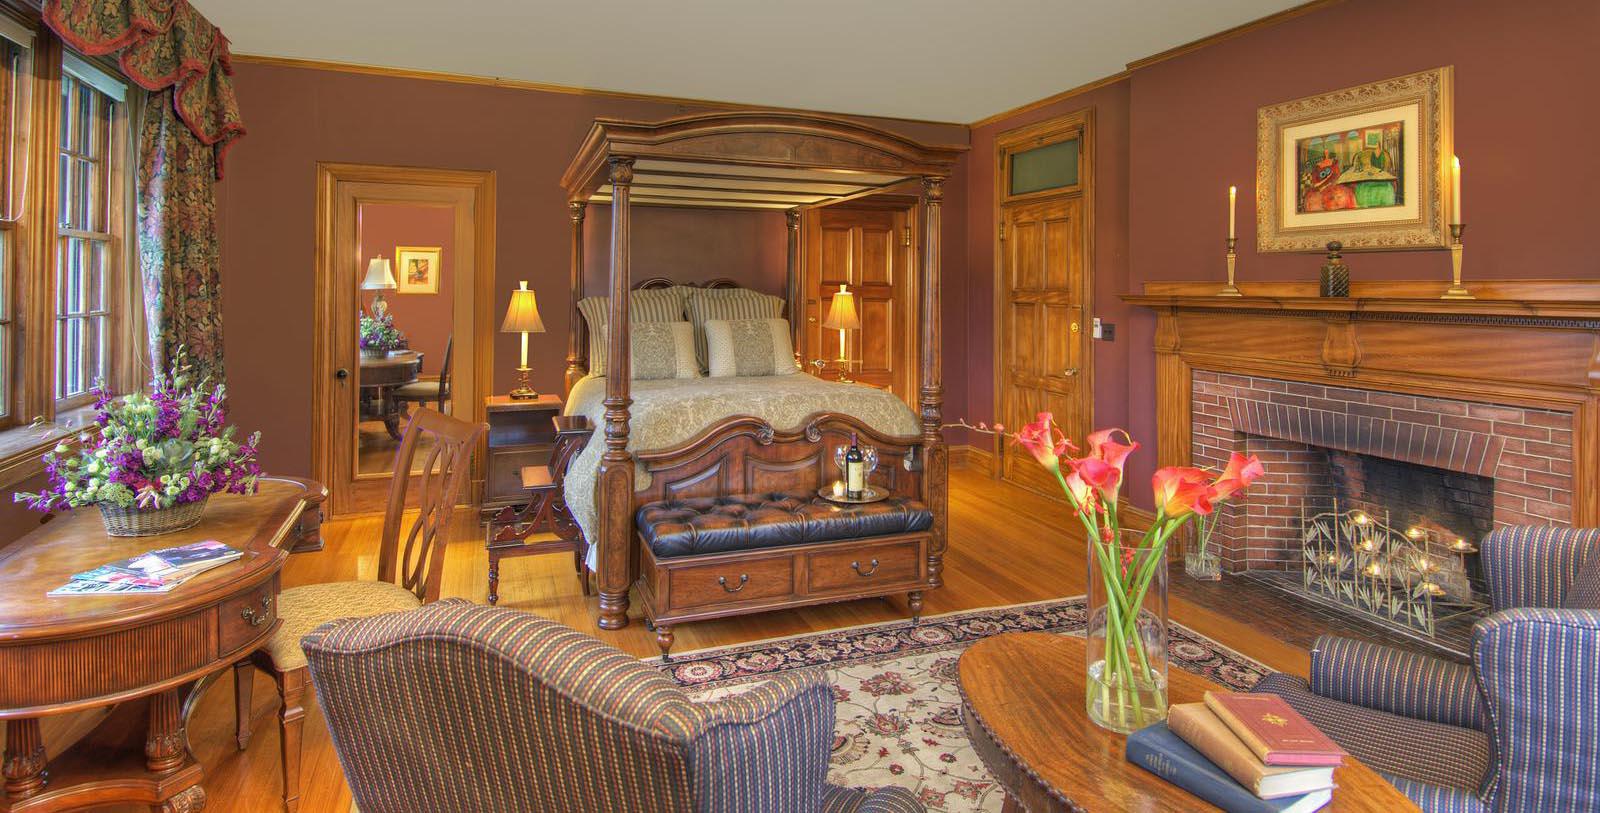 Image of Guestroom at Castle Hill Resort and Spa, 1905, Member of Historic Hotels of America, in Cavendish, Vermont, Accommodations